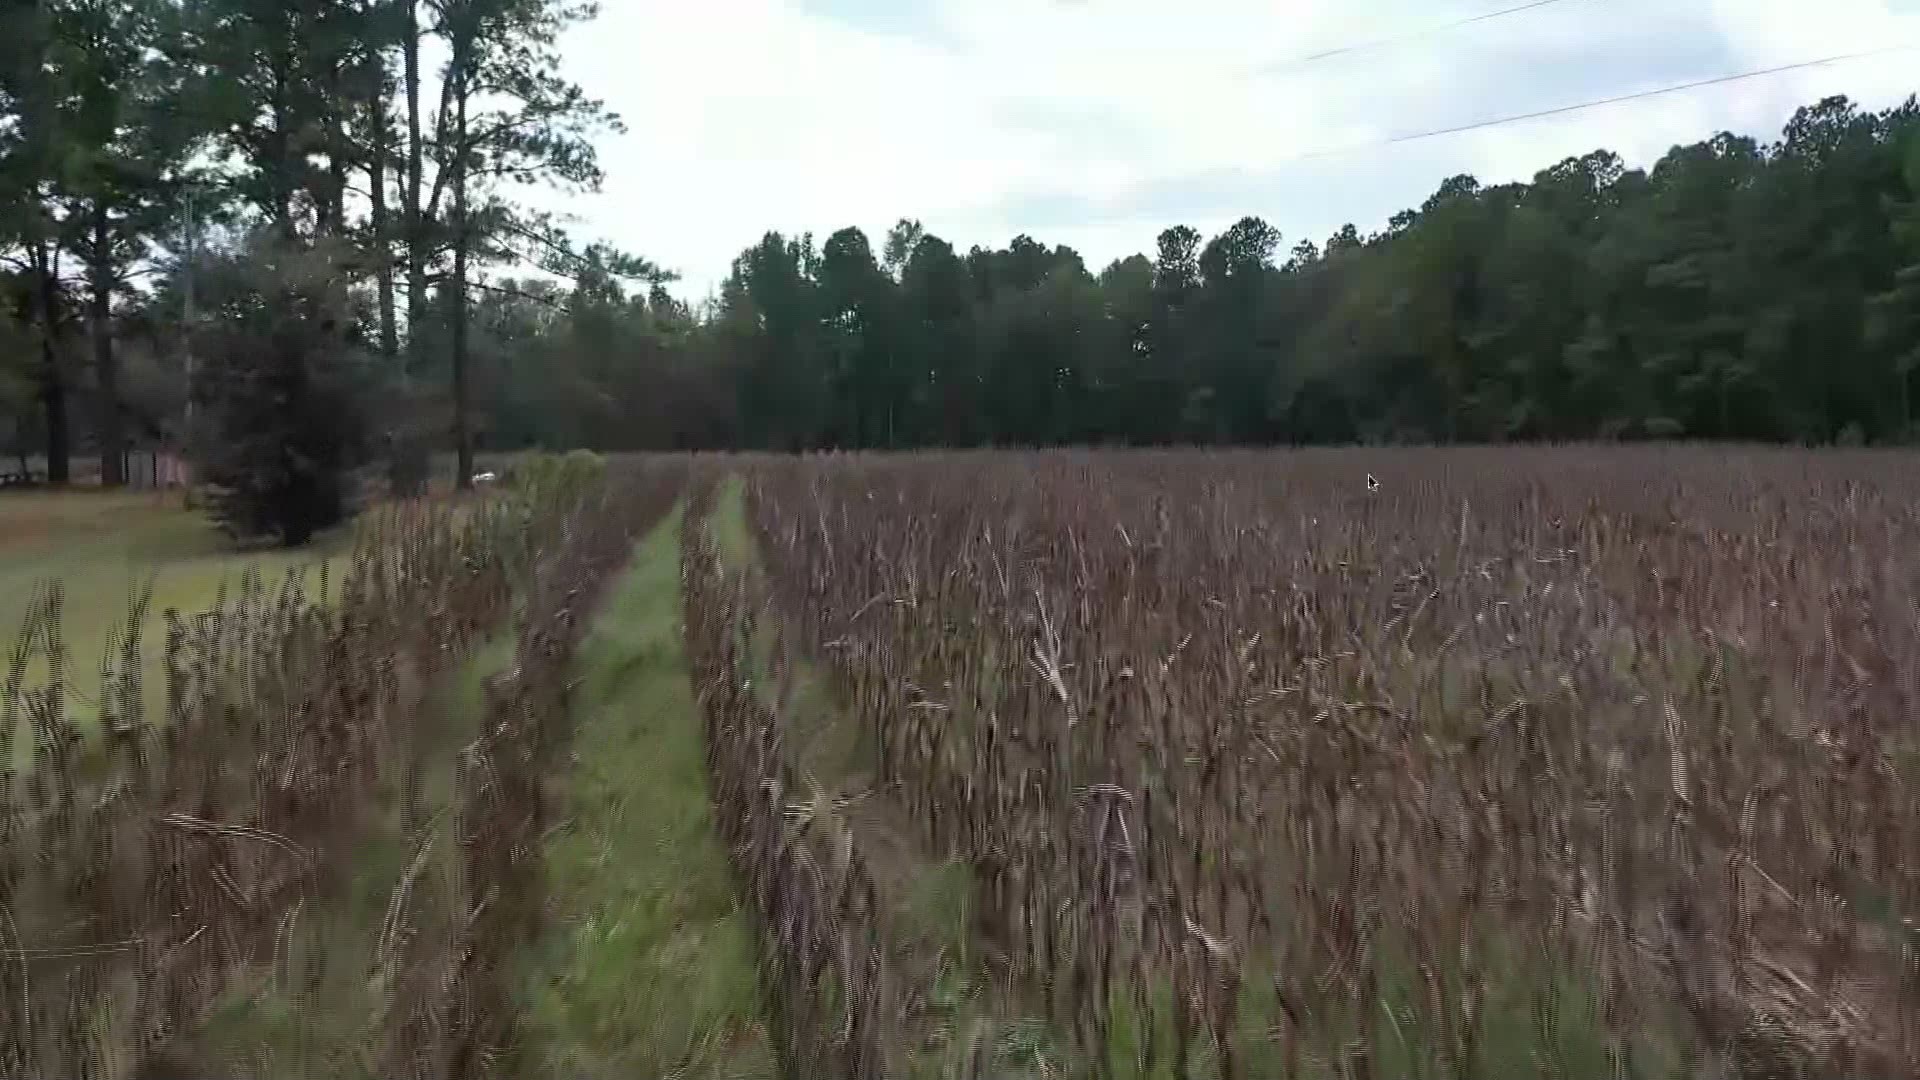 More than 45 million people across 14 Southern states are now in the midst of what’s being called a “flash drought.” Farmers in the south are being hit hard.